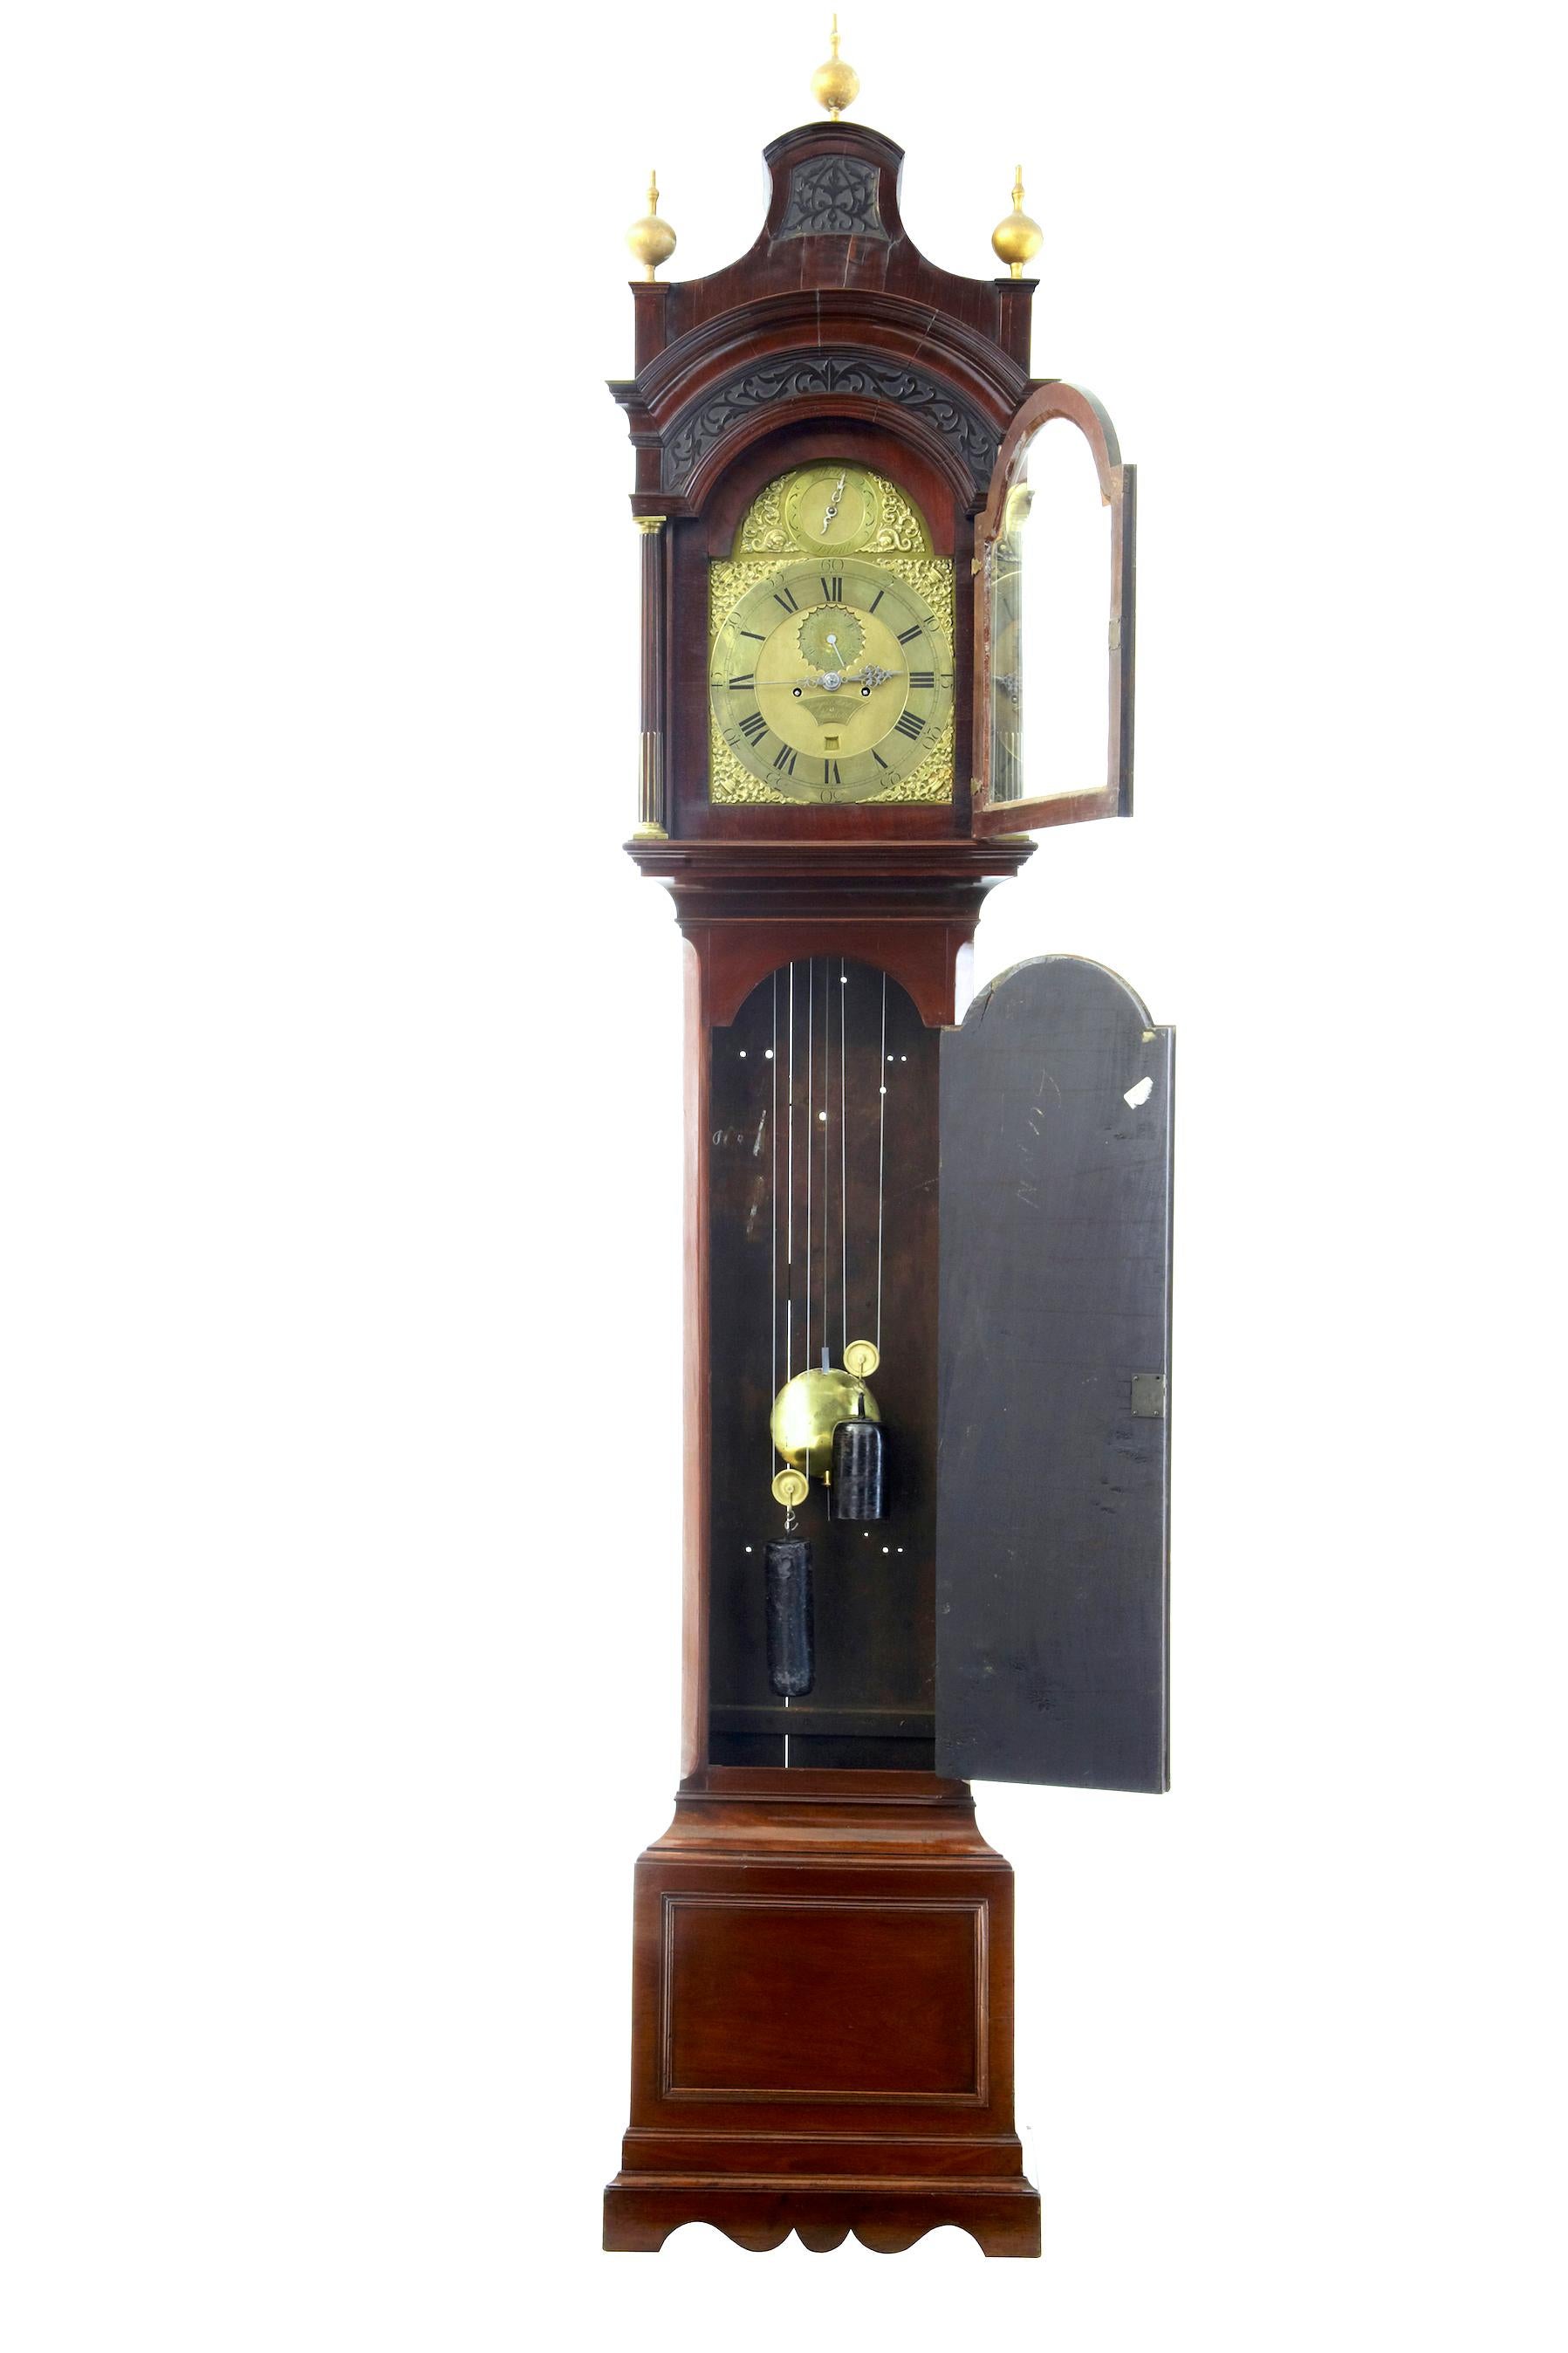 Stunning London long case clock, circa 1760.The clock with makers mark Conyers Dunlop London, who became an apprentice in 1725 before becoming a master clockmaker in 1758. The movement has been professionally restored. Stunning carved hood,